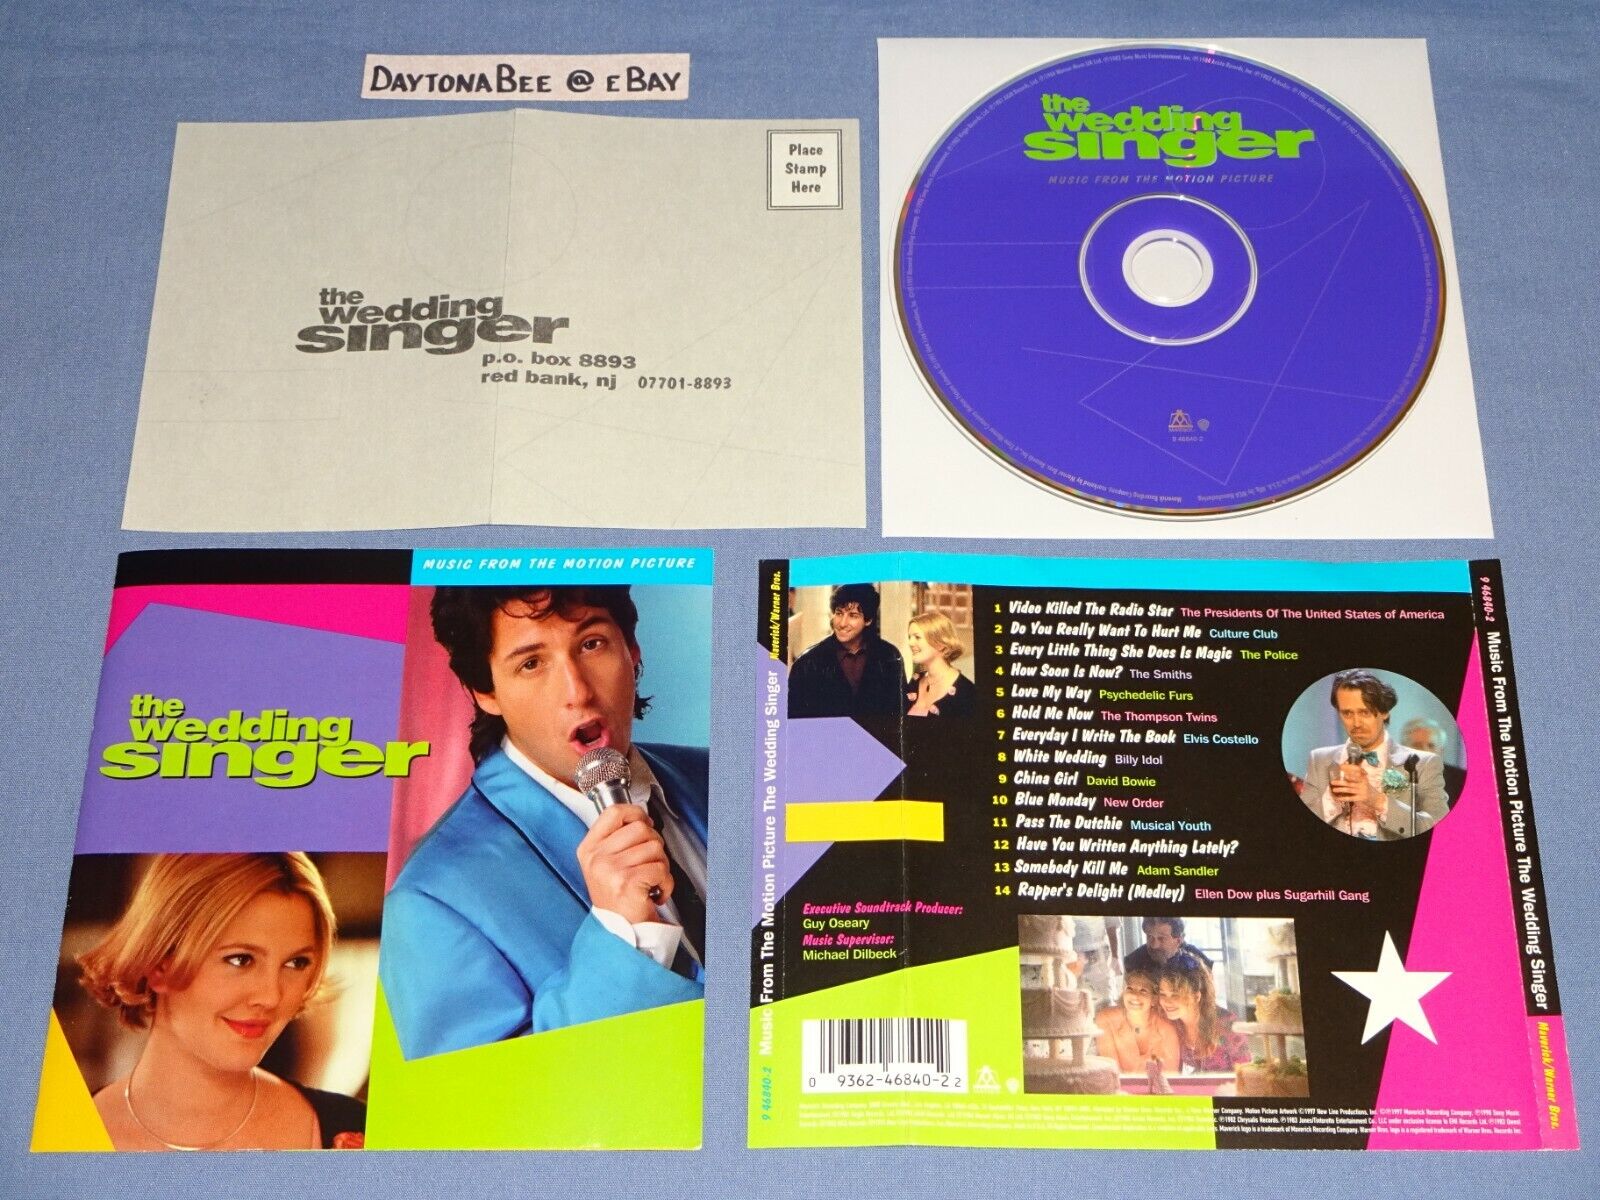 The Wedding Singer Soundtrack 1997 Cd David Bowie Billy Idol Psychedelic Furs